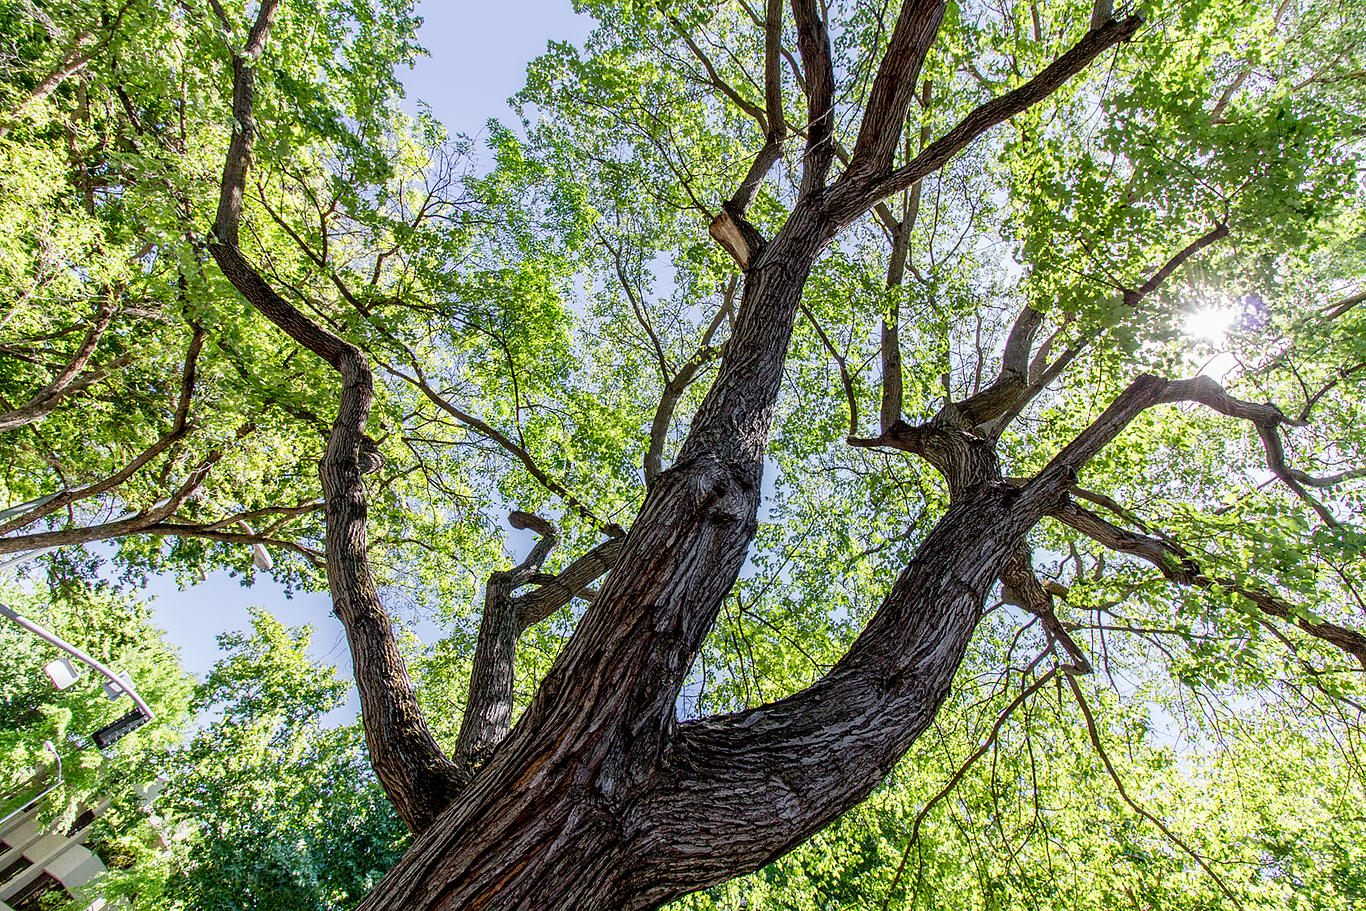 Image of a tree looking up into the canopy